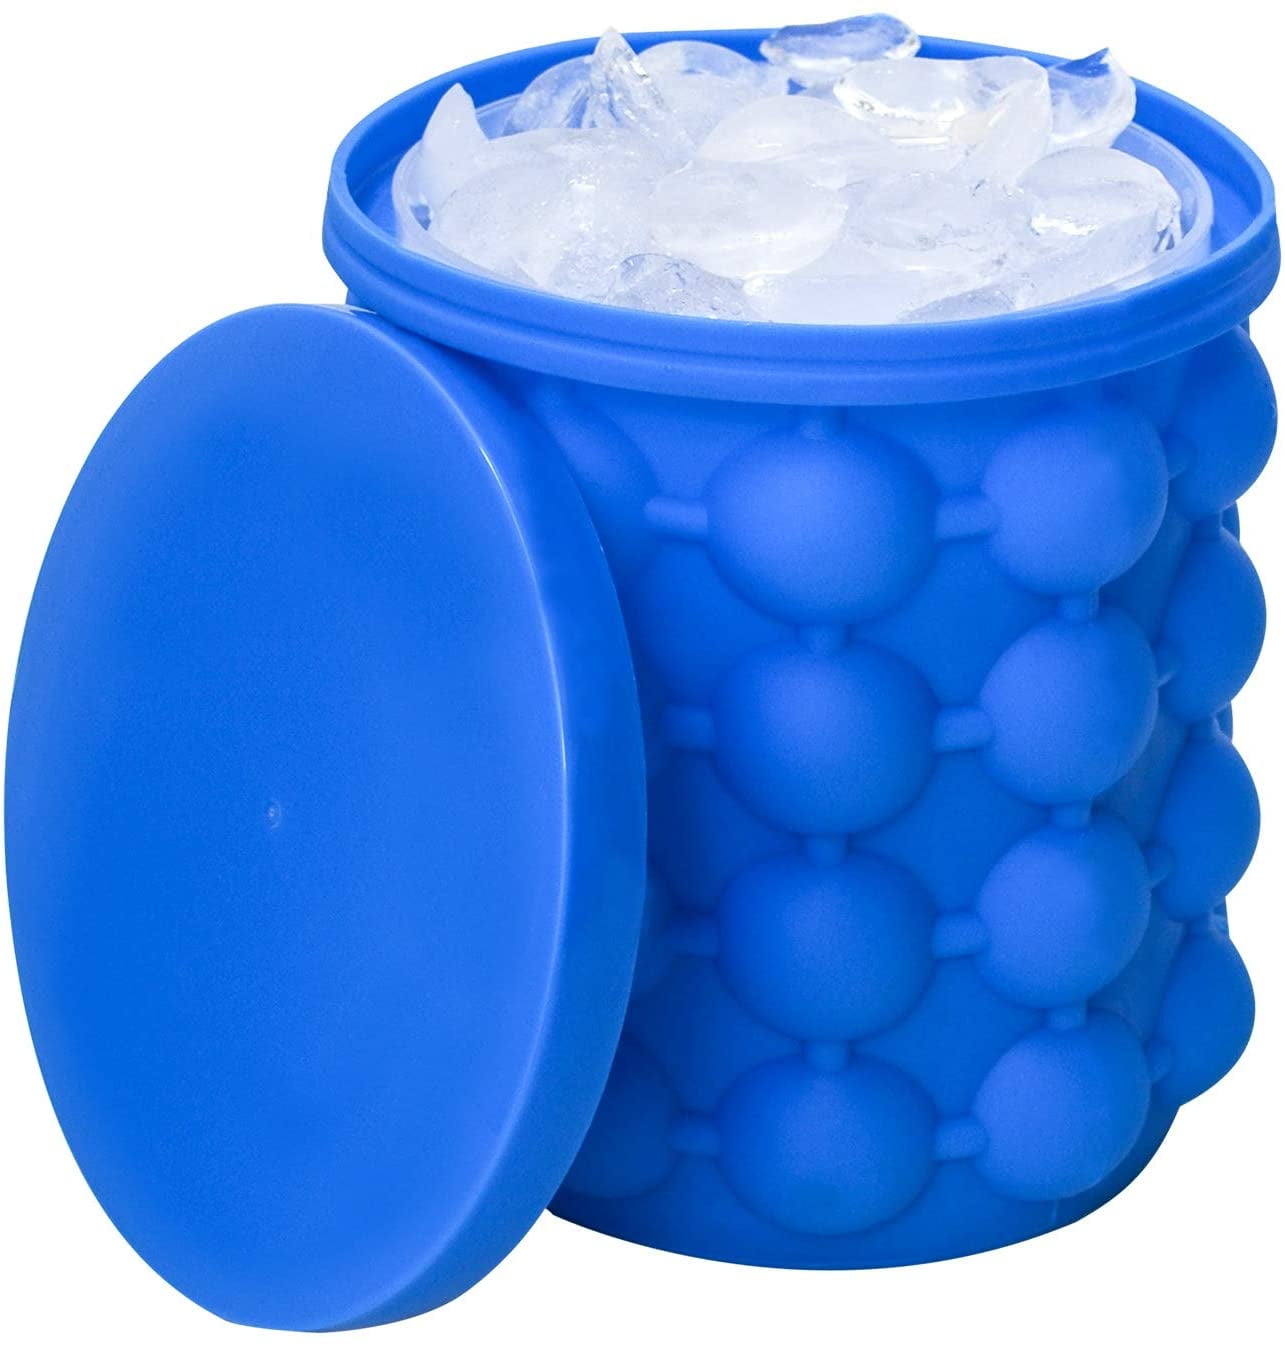 2in1 Portable Silicone Ice Ball Mold Maker Creative Summer Kitchen Gadgets